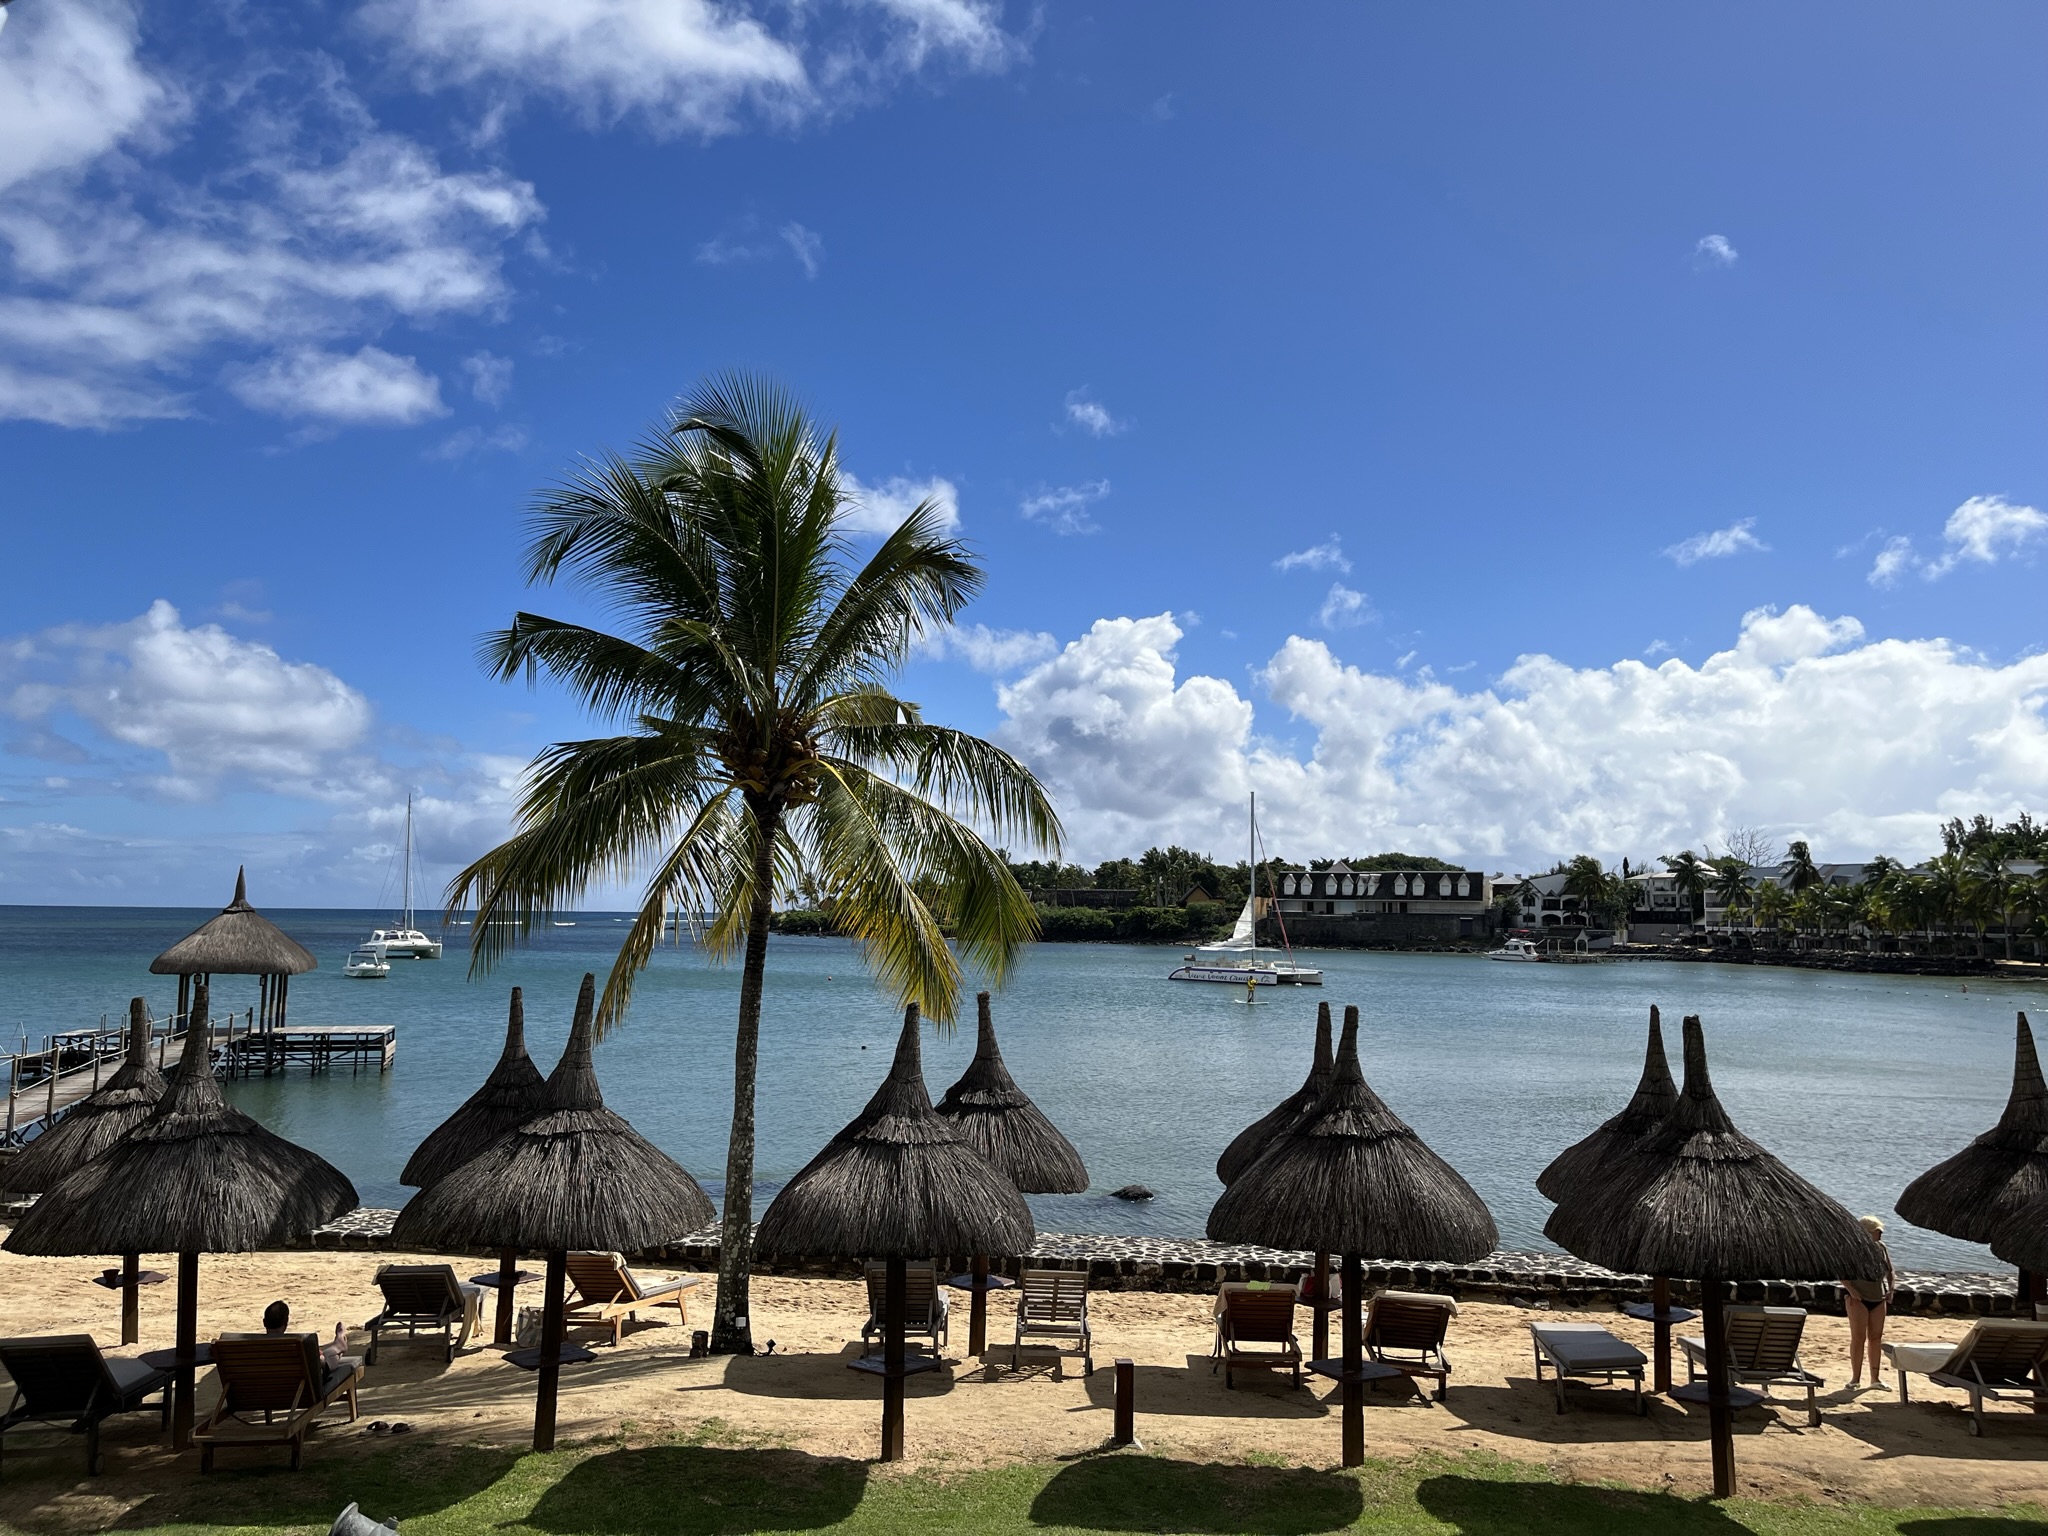 Destination Trip: Romantic Getaway to Mauritius from Italy